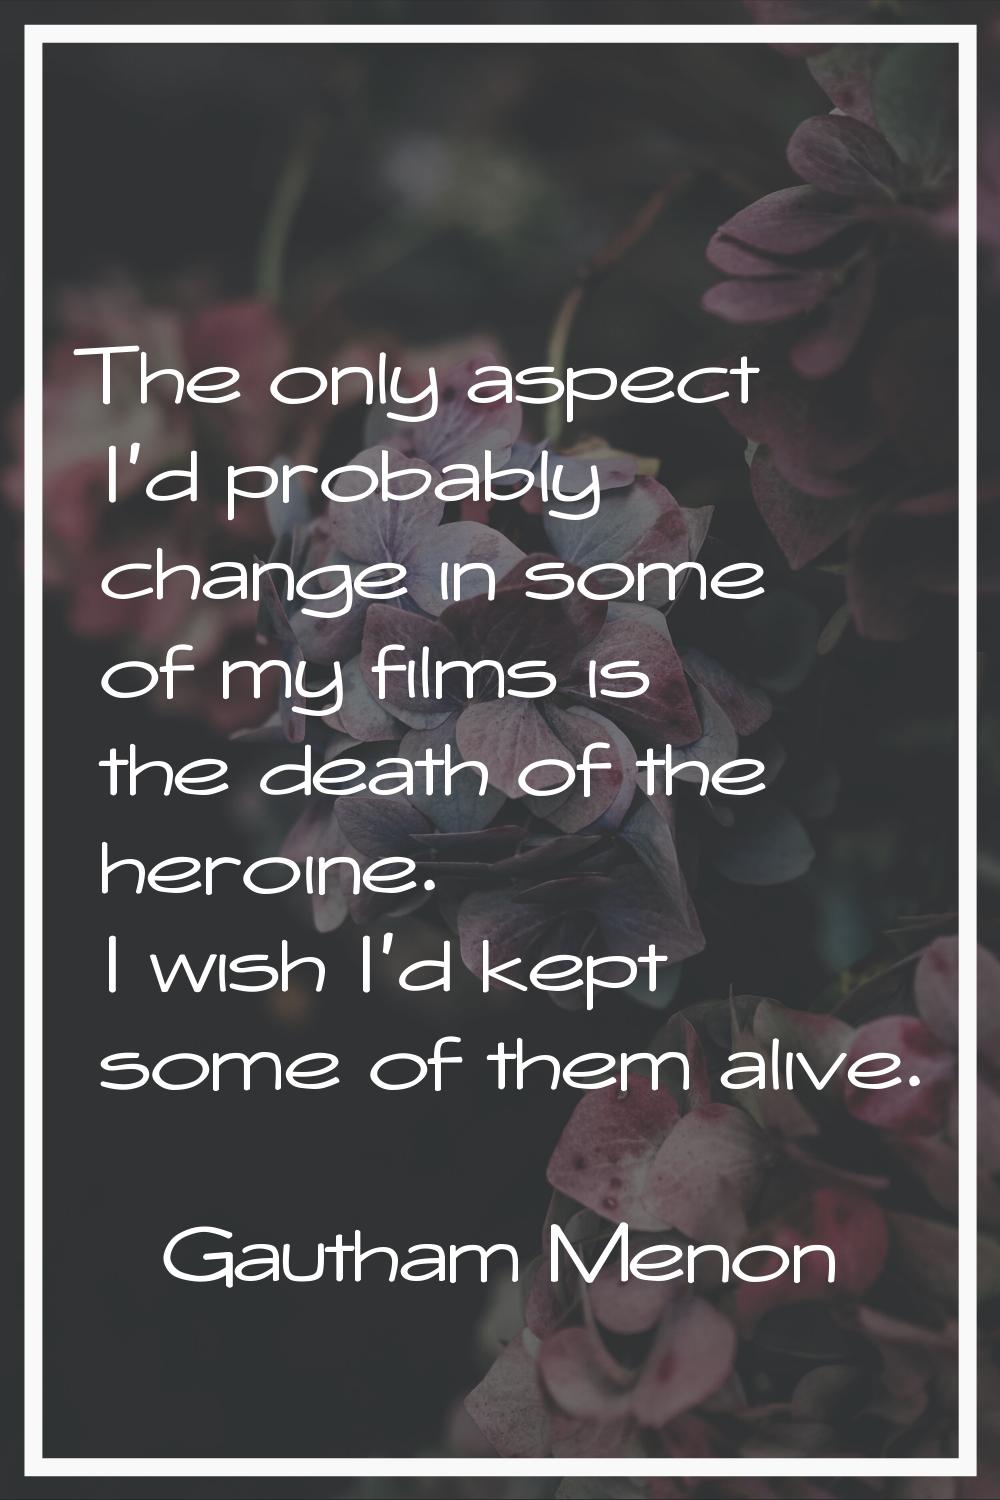 The only aspect I'd probably change in some of my films is the death of the heroine. I wish I'd kep